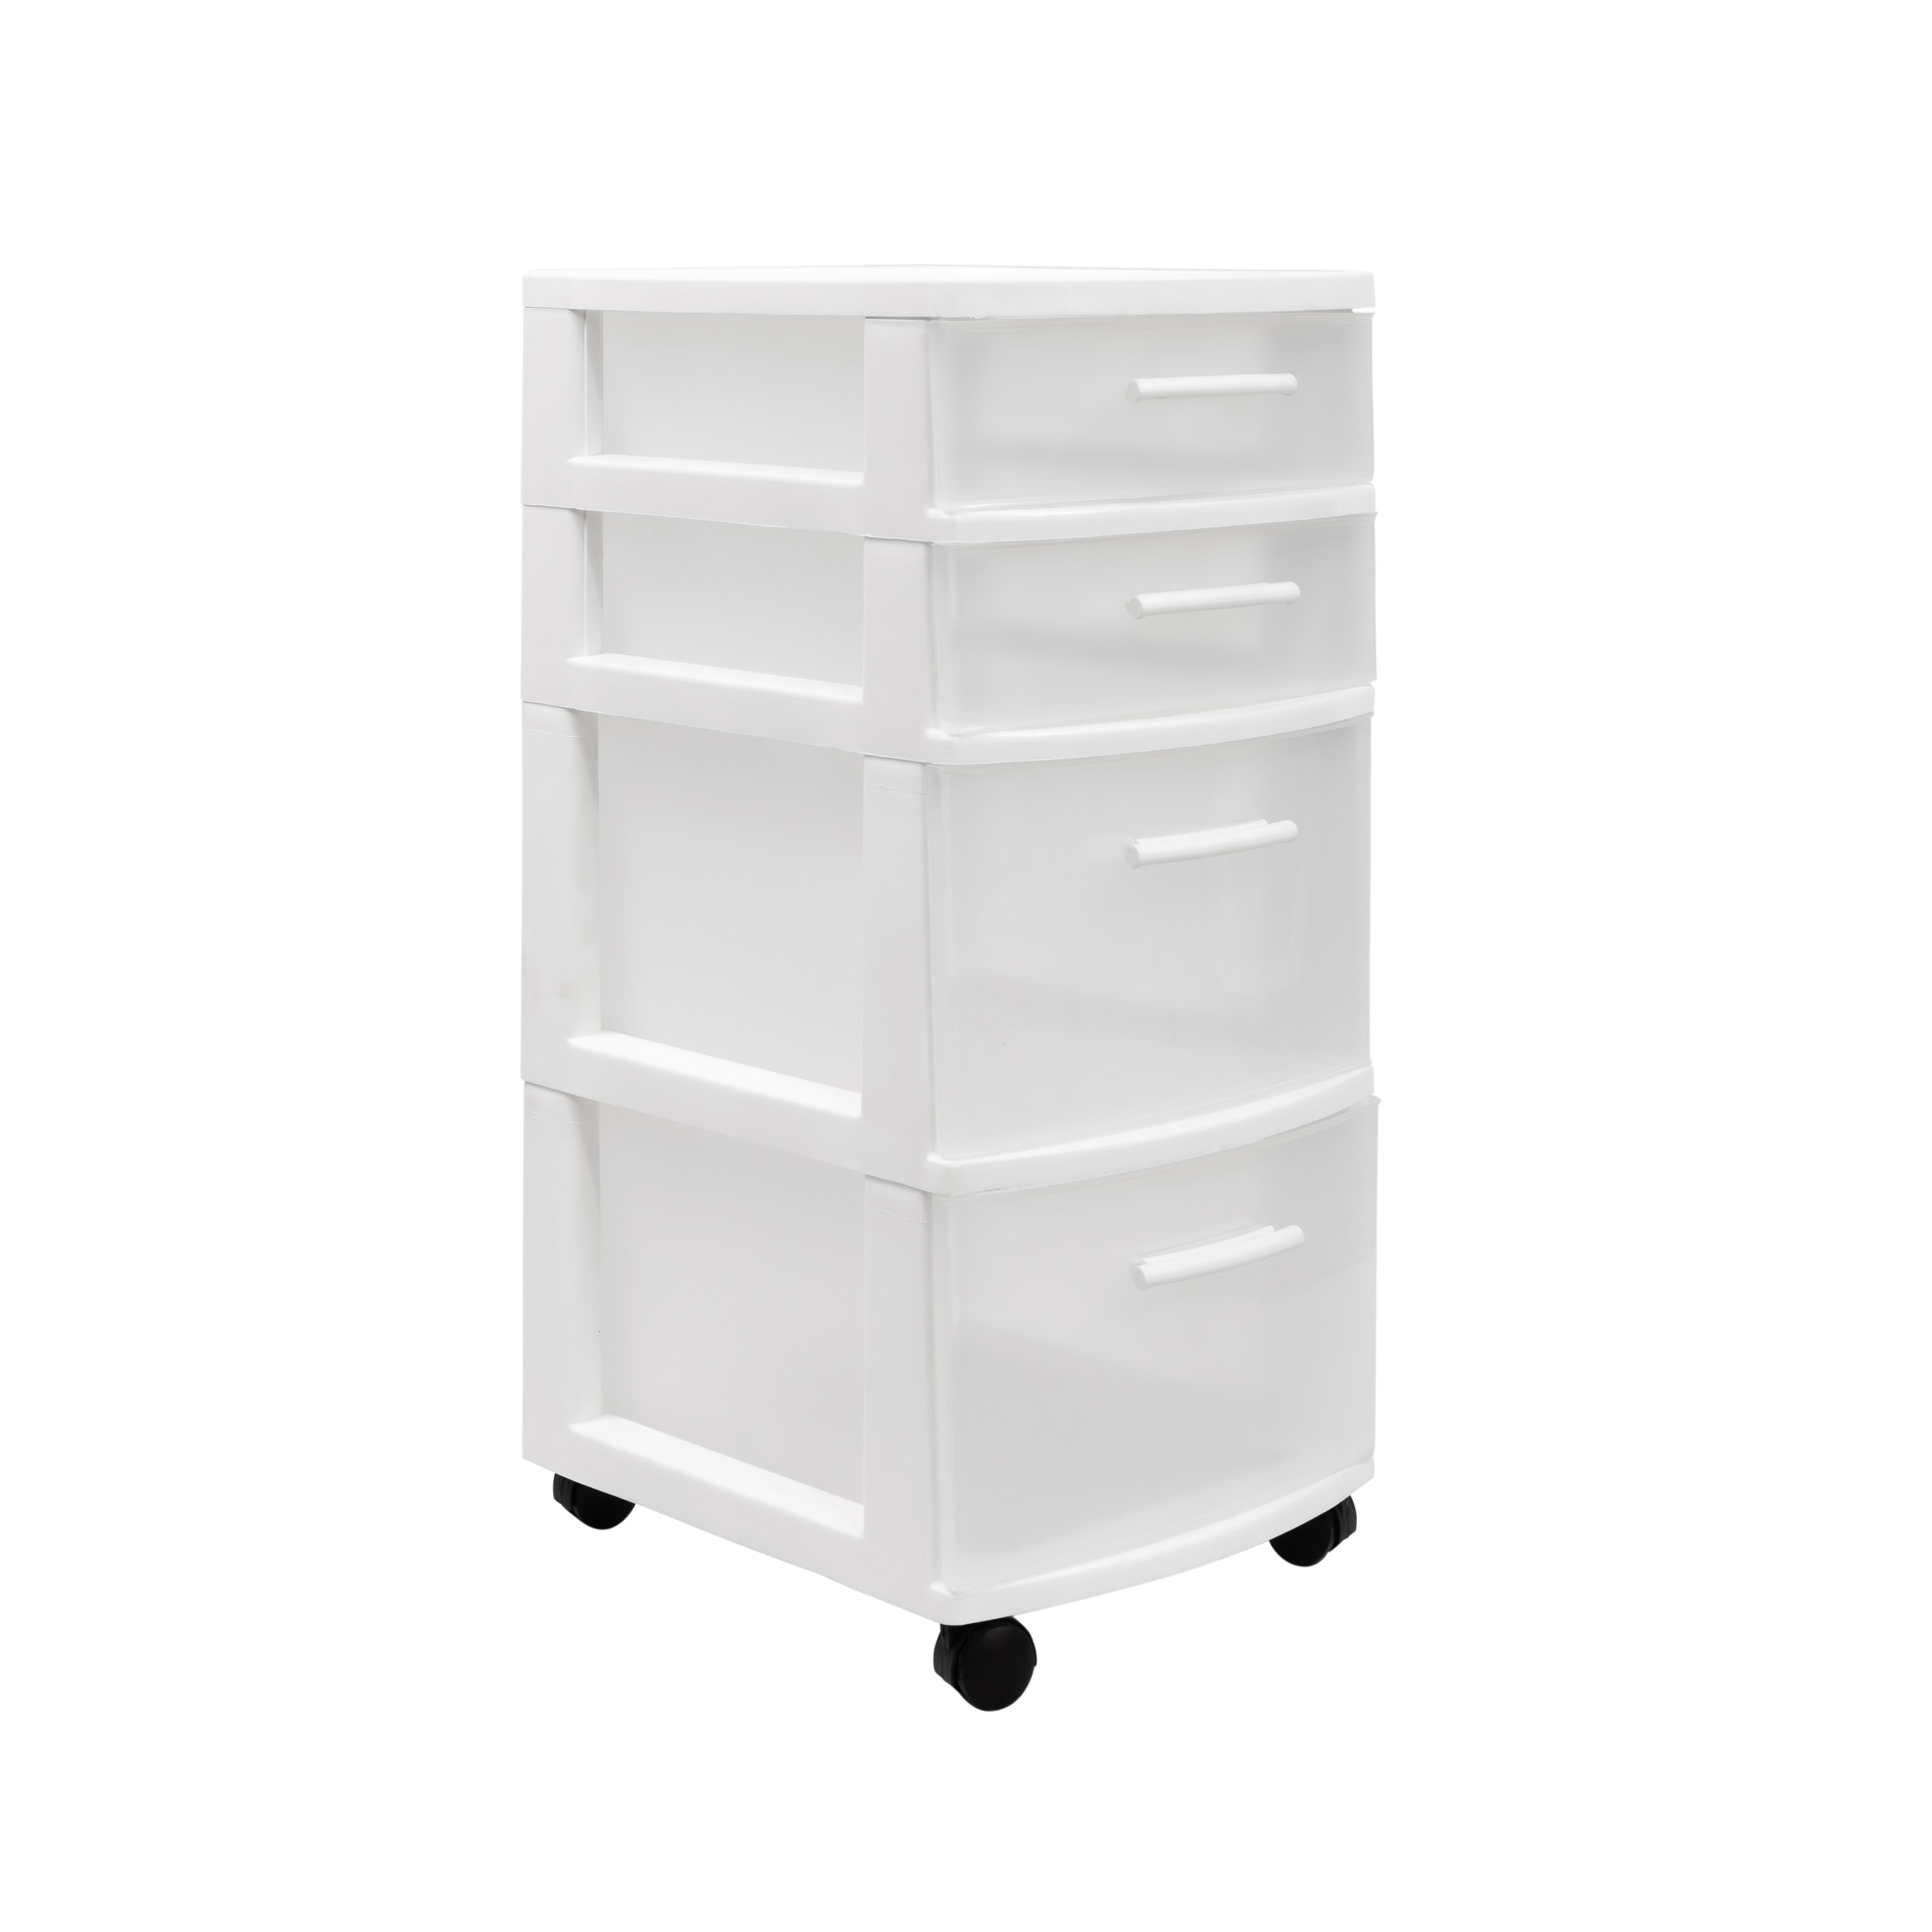 https://ak1.ostkcdn.com/images/products/is/images/direct/e4c7abffb3372da18fa17e2d94c95c8c16b9b684/MQ-Eclypse-4-Drawer-Rolling-Storage-Cart.jpg